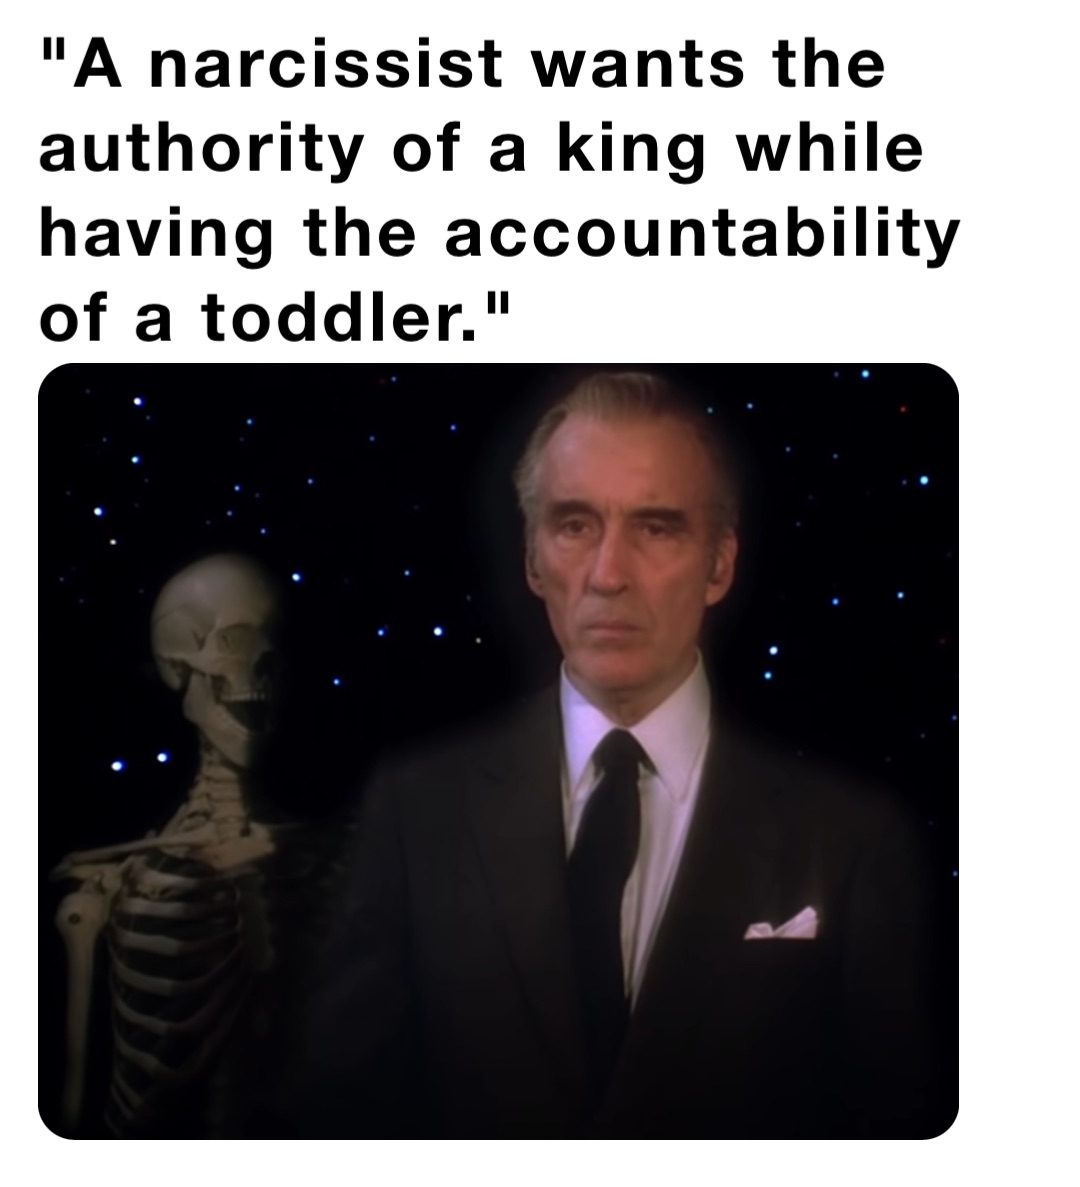 "A narcissist wants the authority of a king while having the accountability of a toddler."